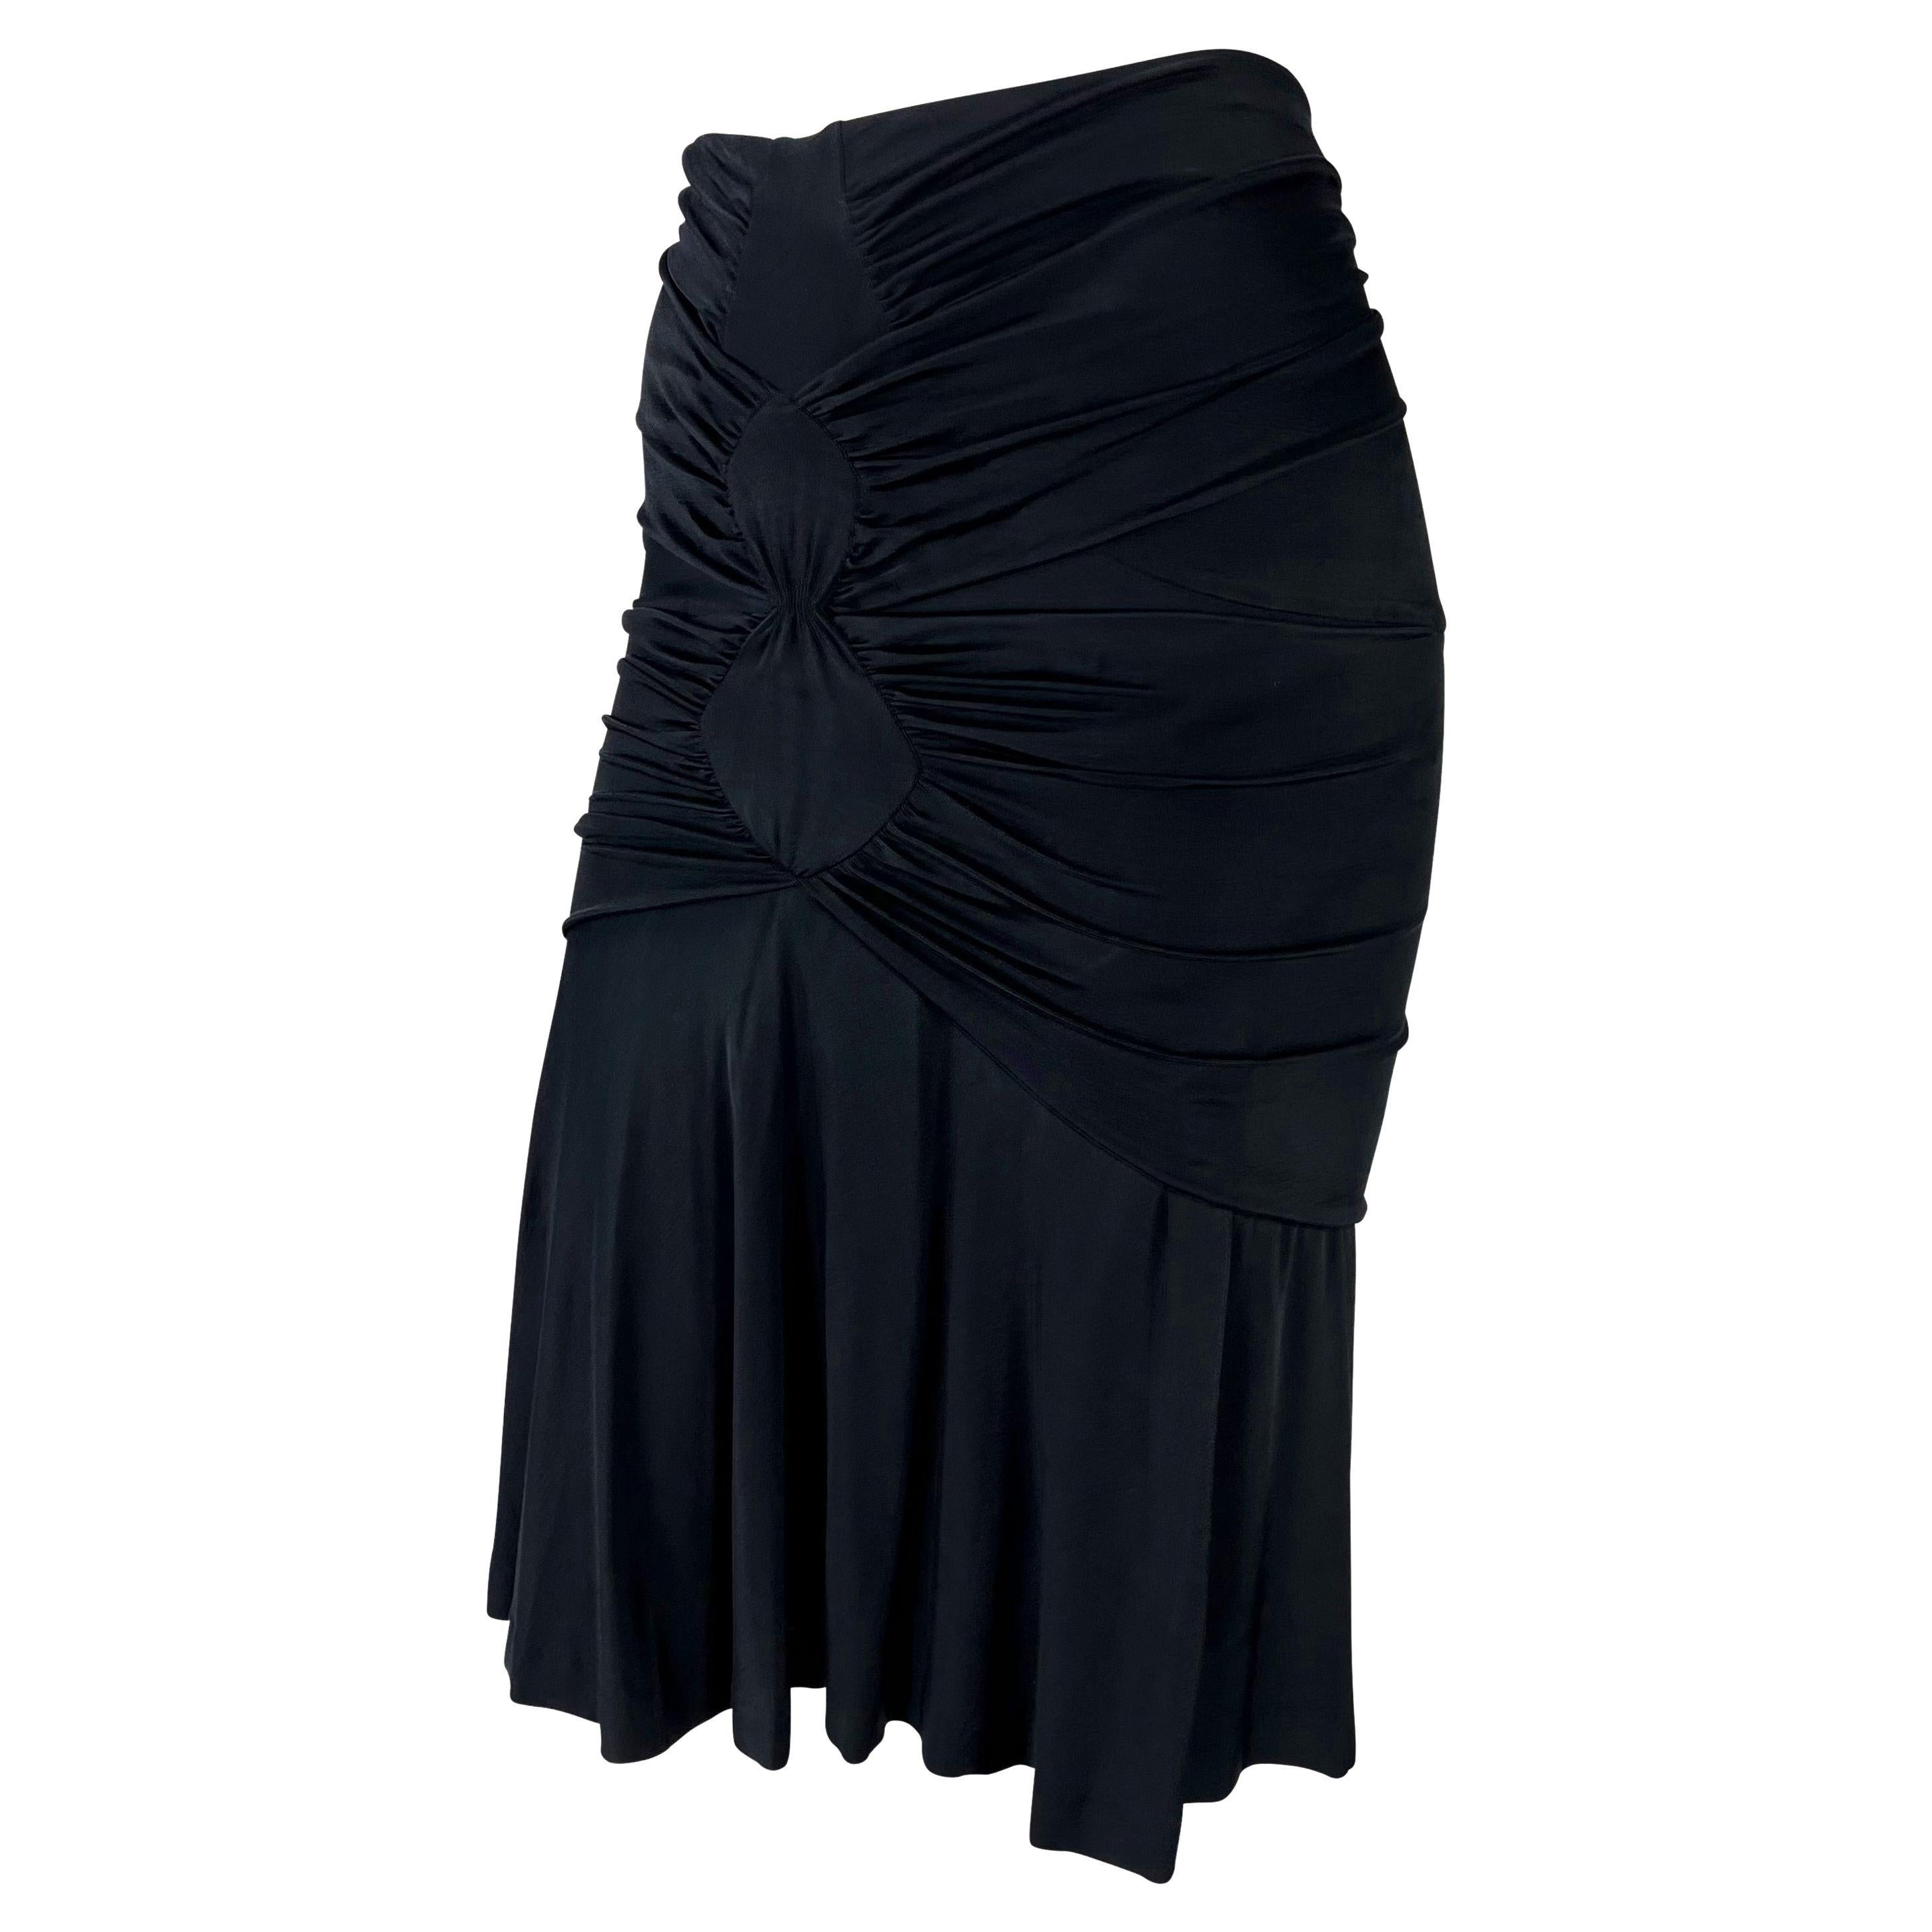 S/S 2003 Yves Saint Laurent by Tom Ford Runway Black Stretch Ruched Skirt In Good Condition In West Hollywood, CA